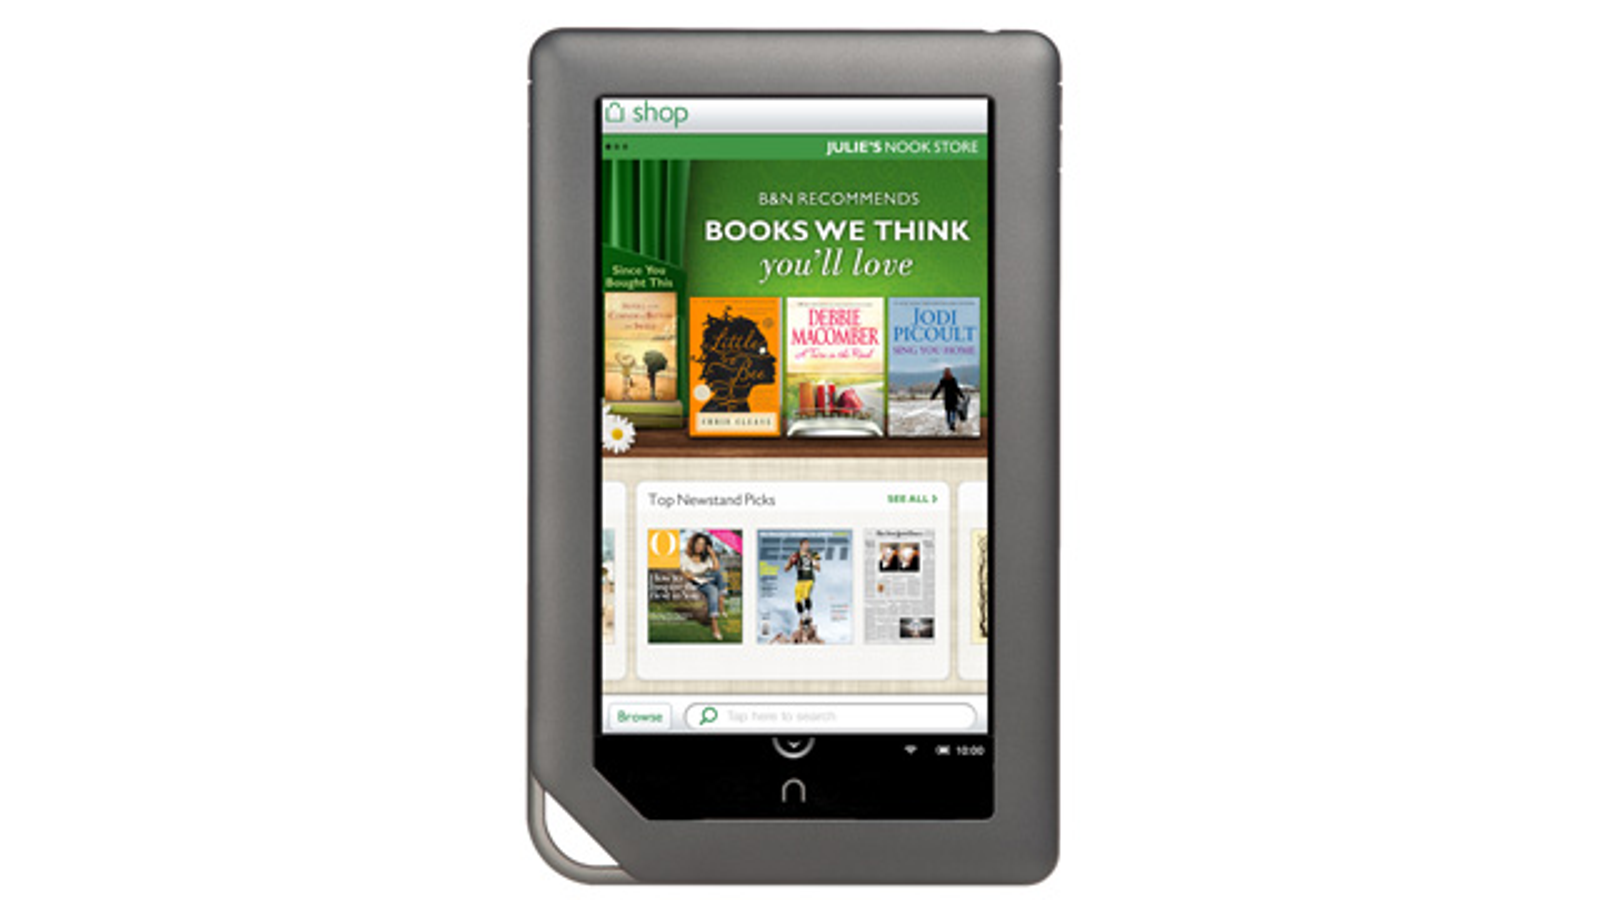 how do i download the nook app for my windows 10 pc